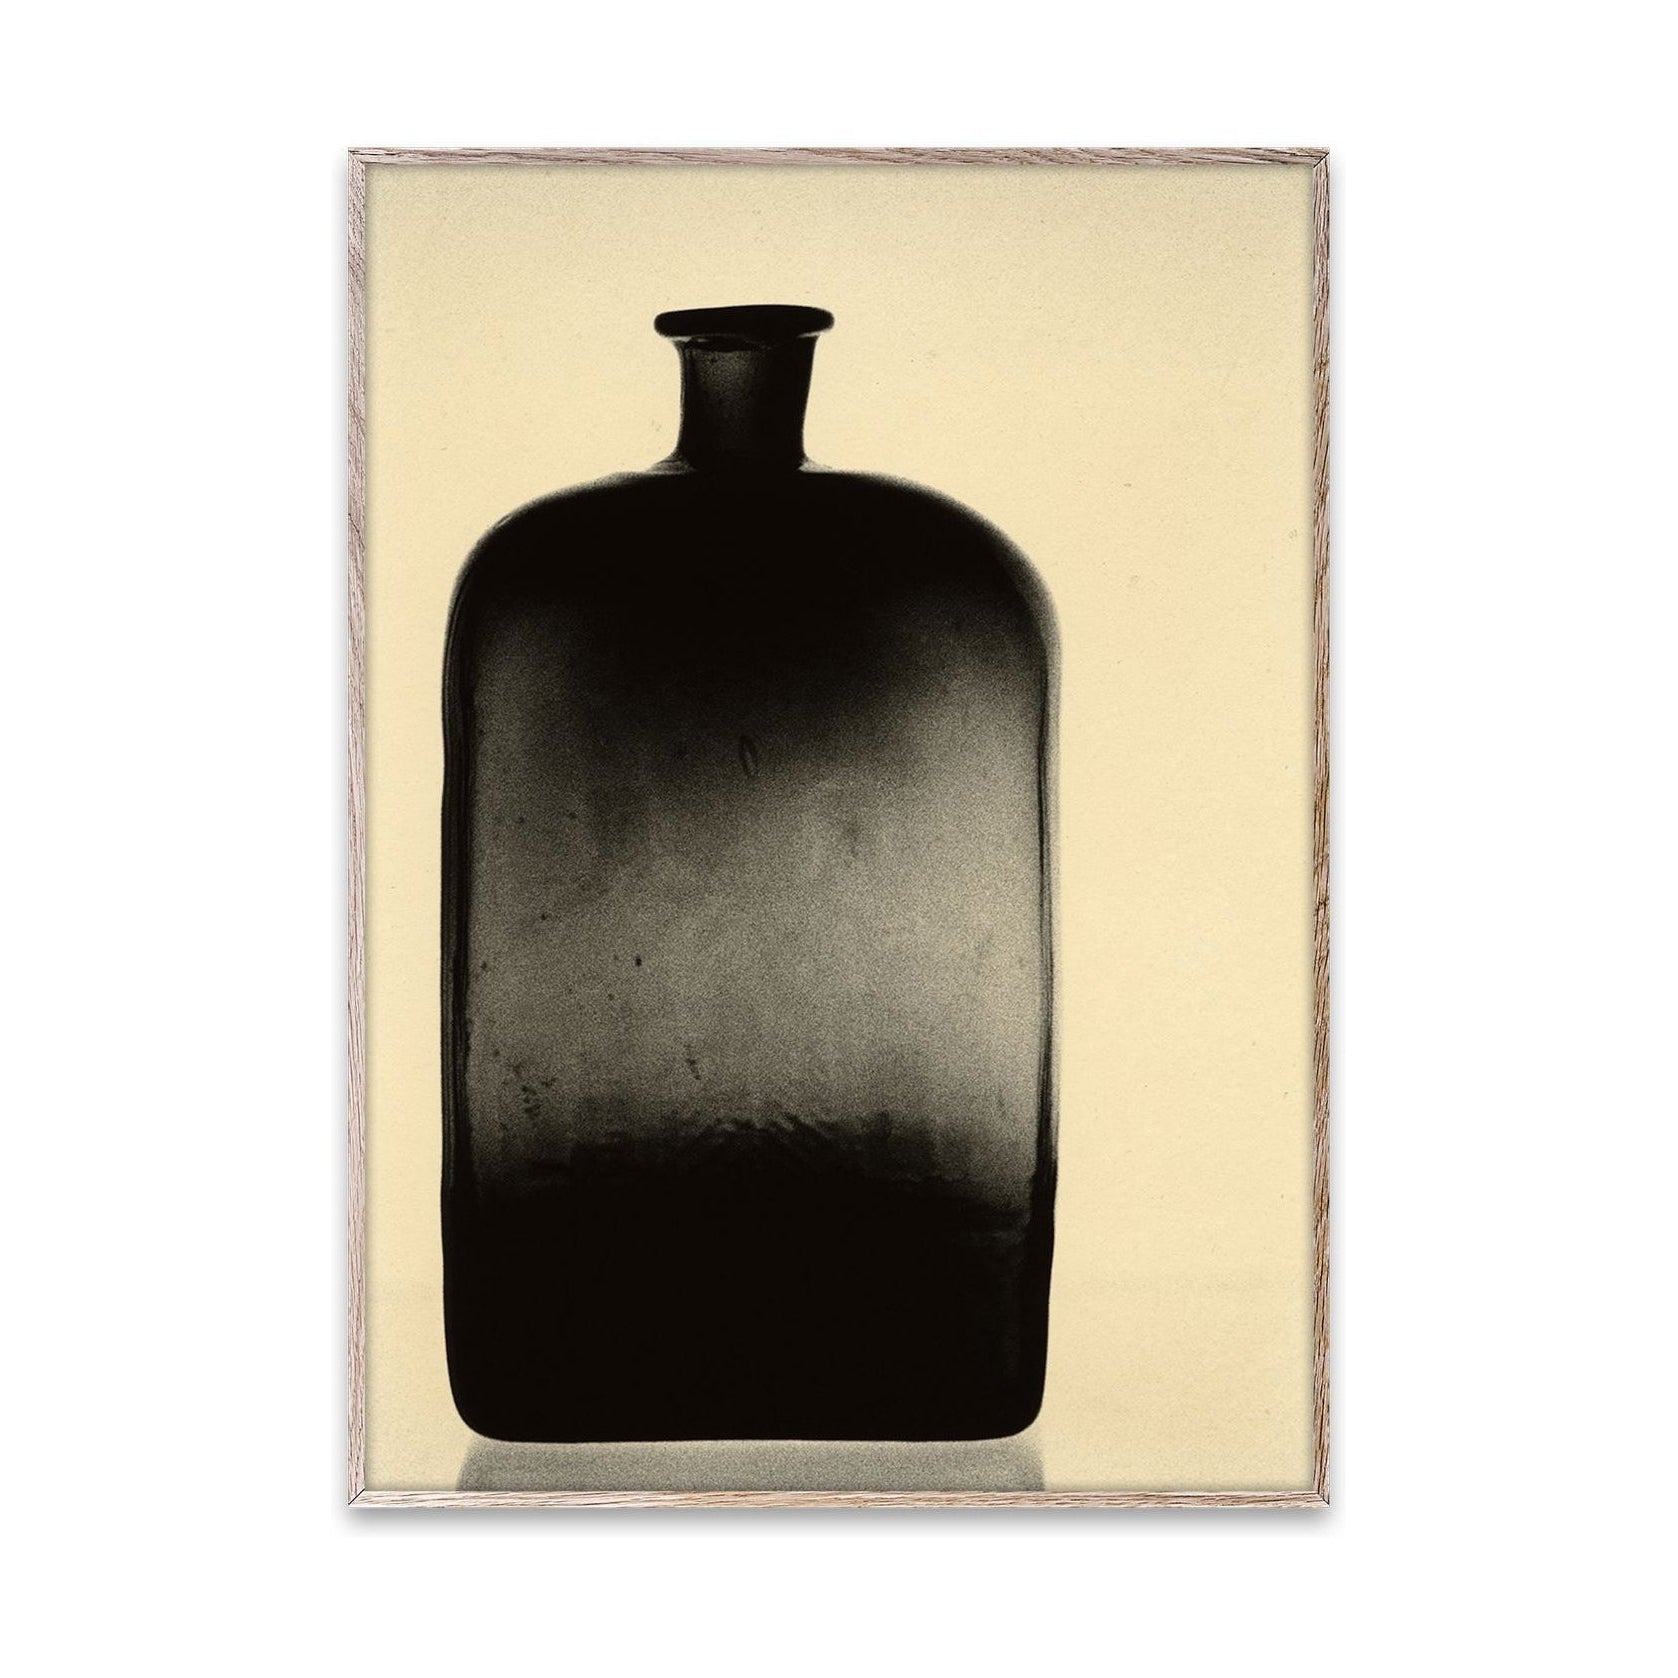 Paper Collective The Bottle Poster, 50x70 Cm